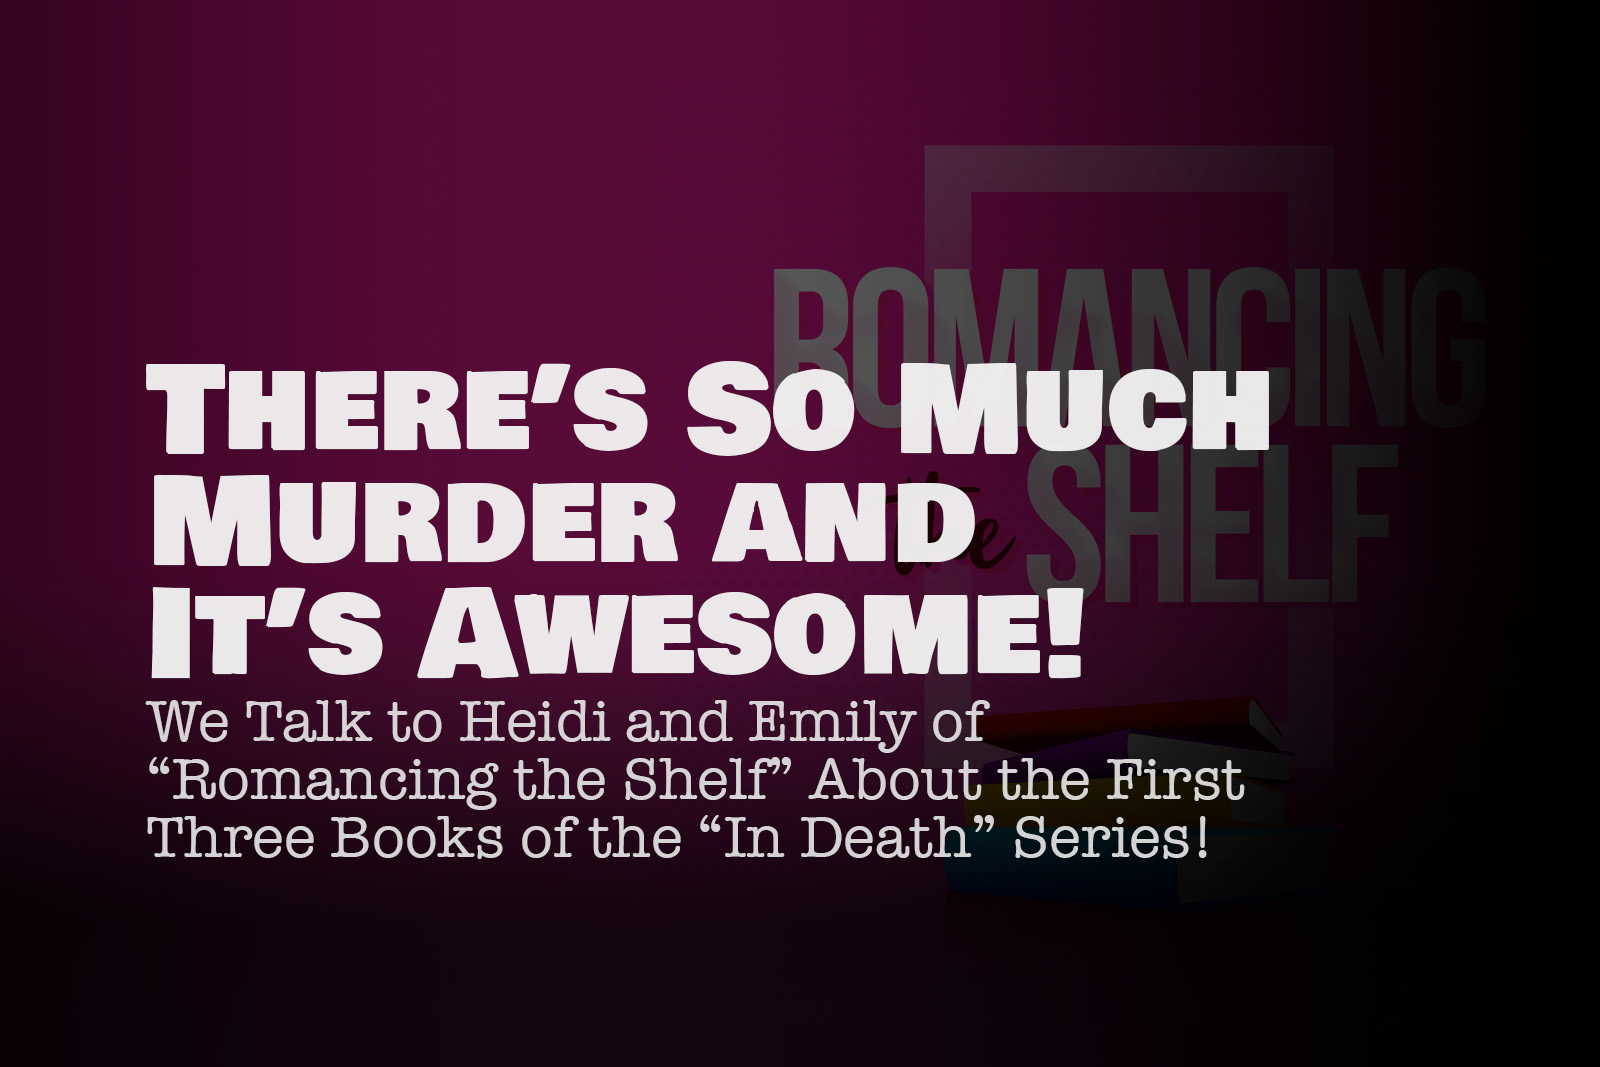 There’s So Much Murder and it’s Awesome! We talk to Emily and Heidi of Romancing the Shelf About the First Three Books of the In Death Series!